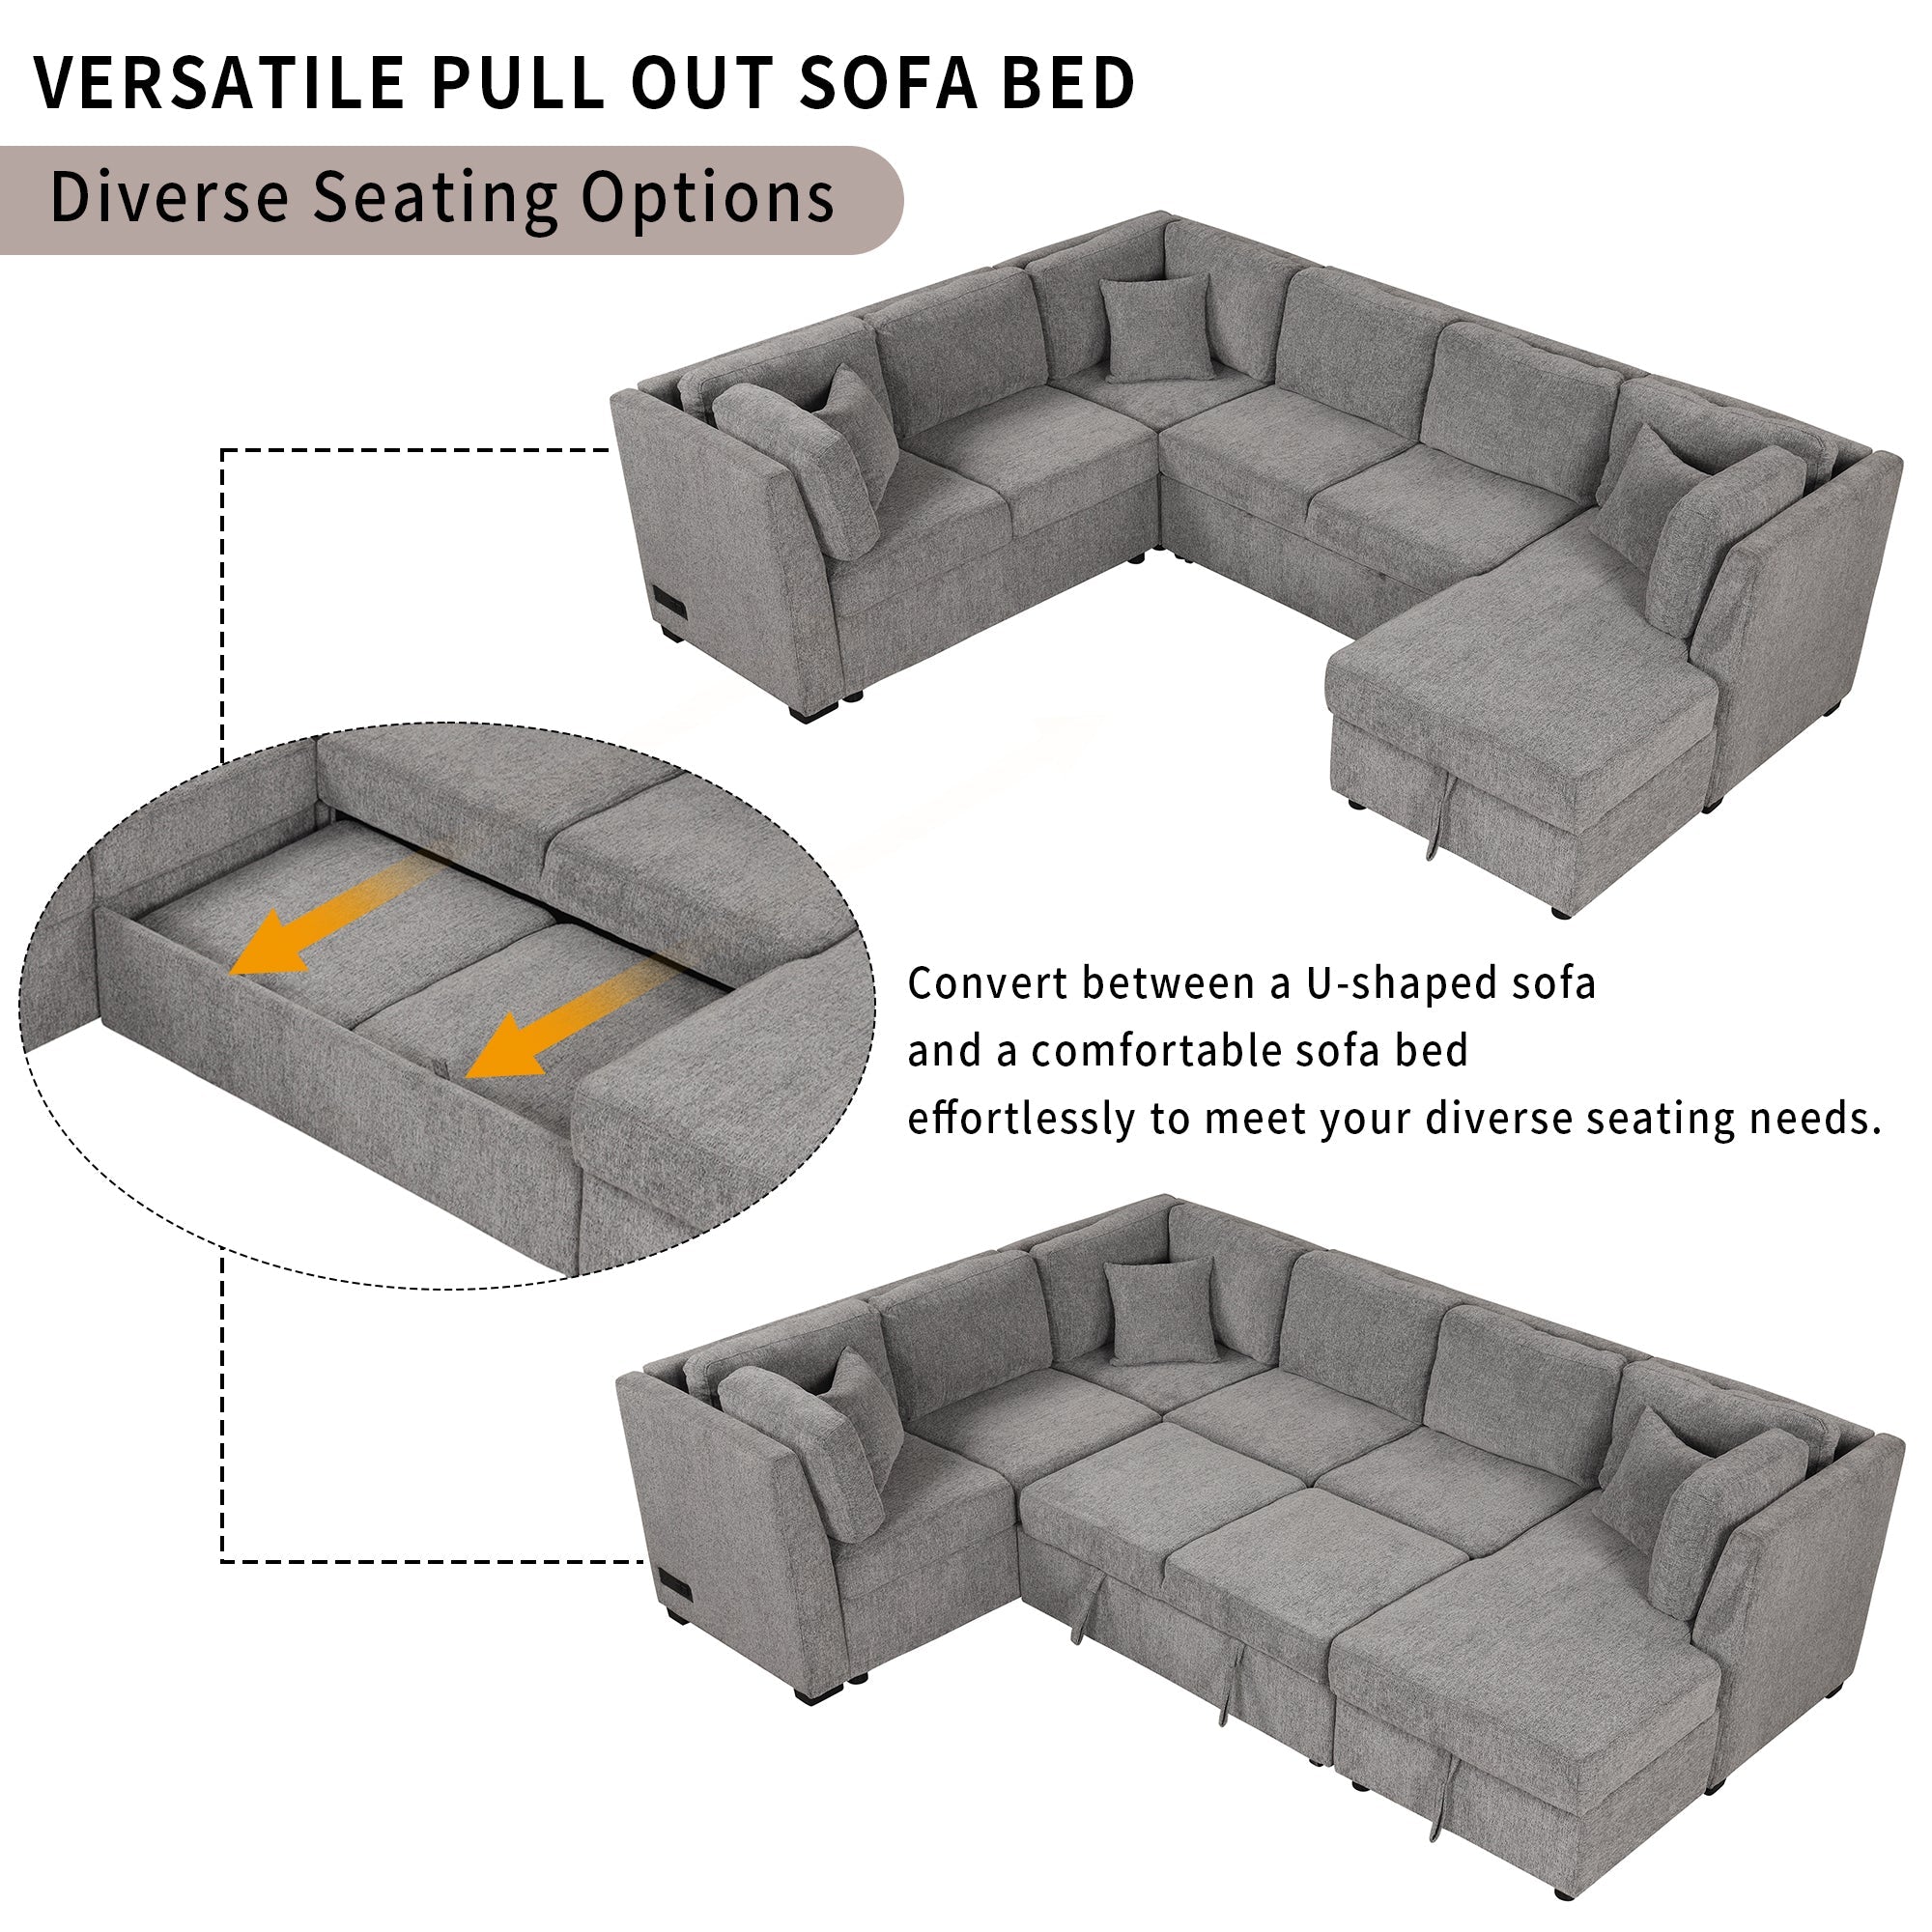 U-Shaped Sectional Sofa Bed w/ Storage Chaise - Light Gray-Stationary Sectionals-American Furniture Outlet